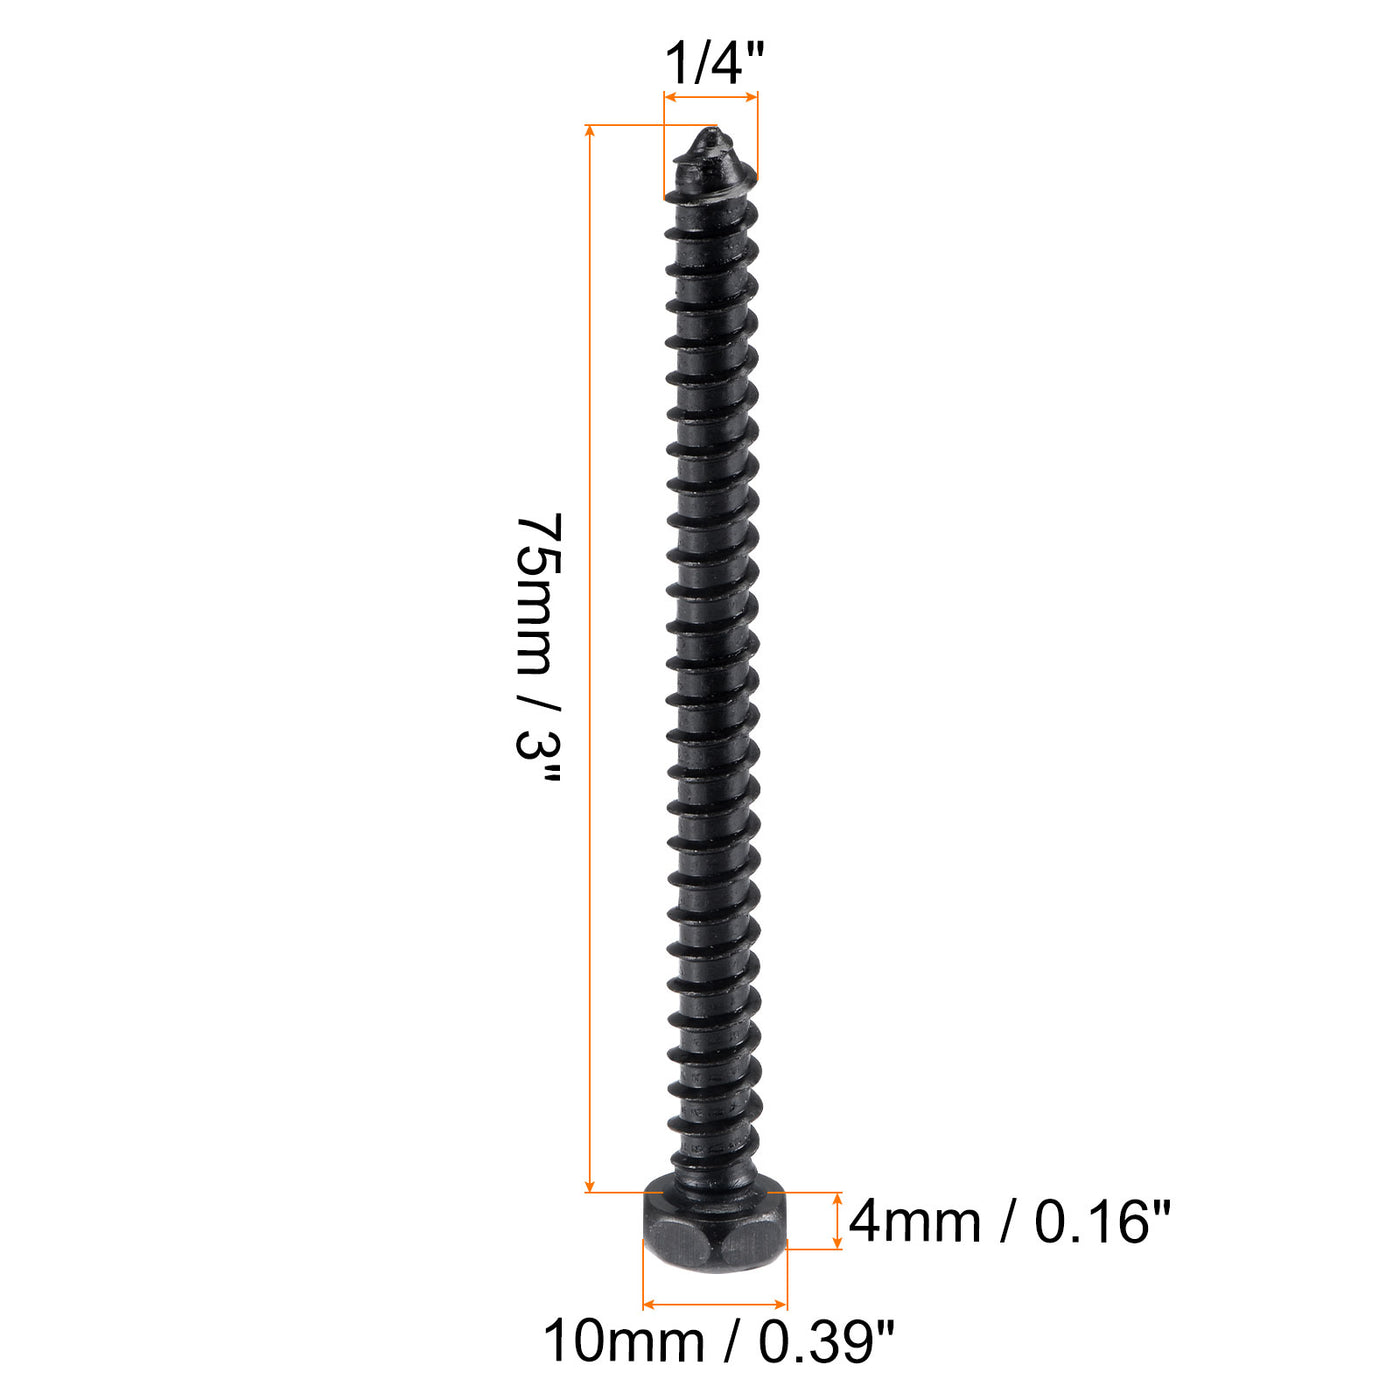 Uxcell Uxcell Hex Lag Screws 1/4" x 3" Carbon Steel Half Thread Self-Tapping 25pcs